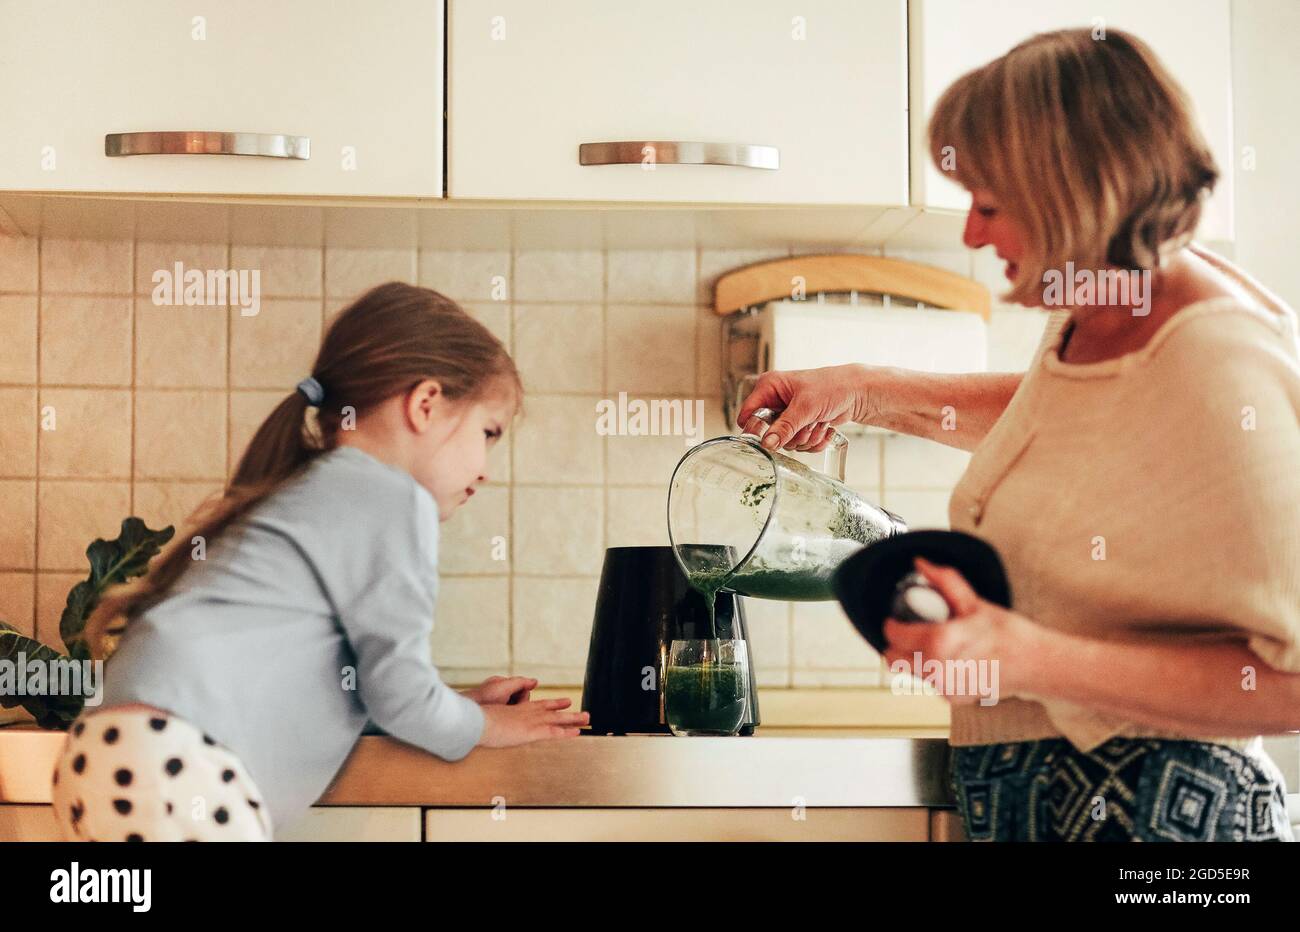 Loving grandmother cooking together with granddaughter at home, using blender to mix vegetables, little girl learning how to use appliances with grand Stock Photo